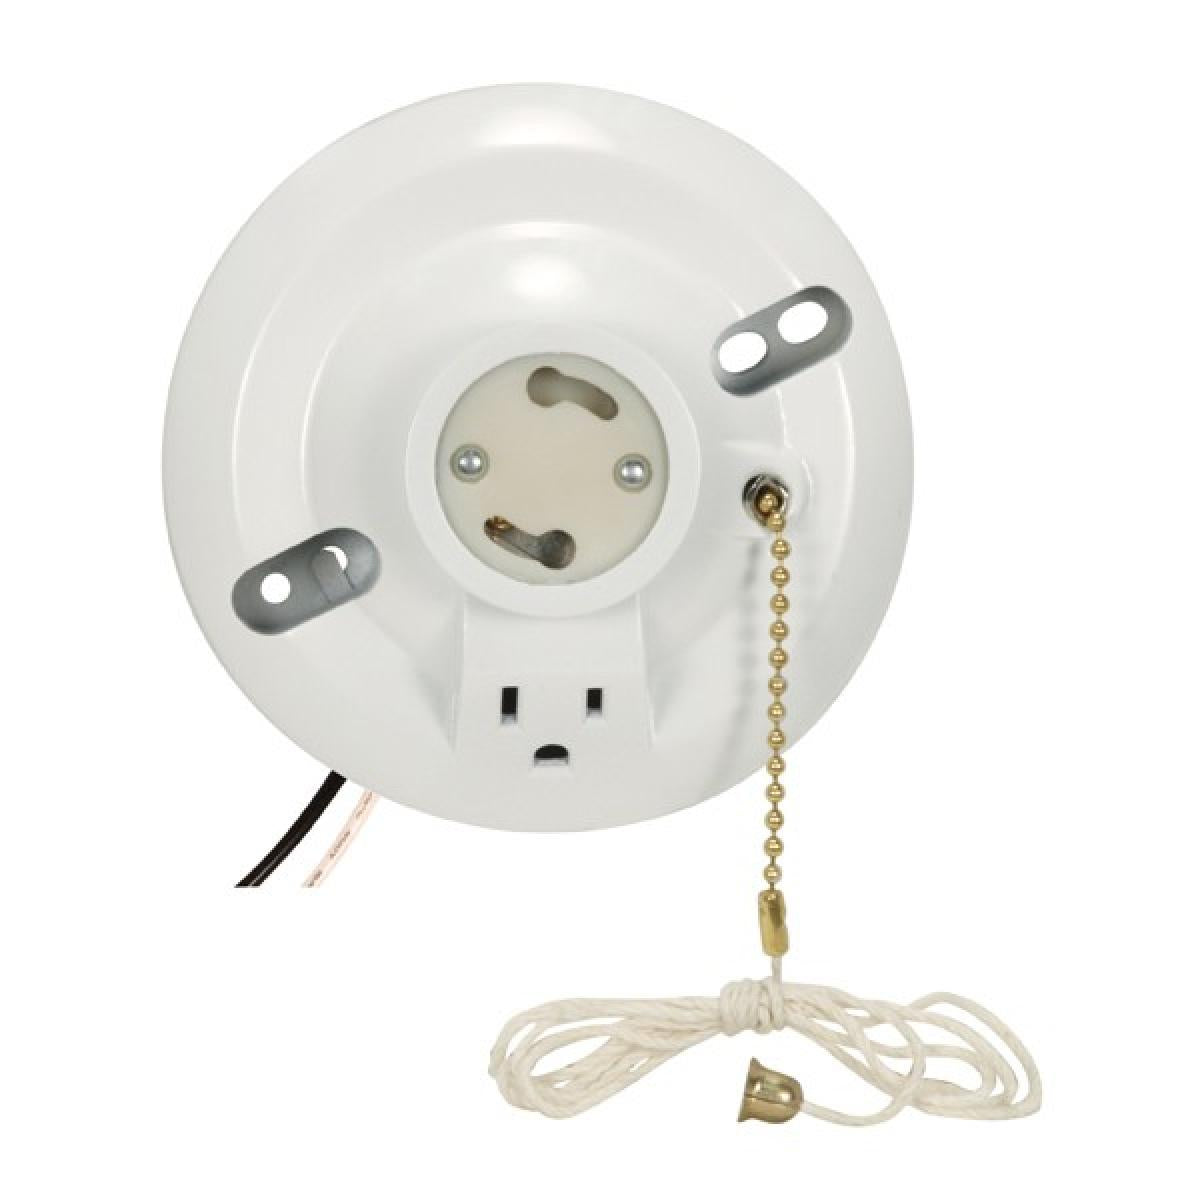 Satco 90-2484 White Phenolic GU24 On-Off Pull Chain Ceiling Receptacle With Grounded Outlet 6" AWM B/W Leads 105C 4-1/2" Diameter 75W 250V